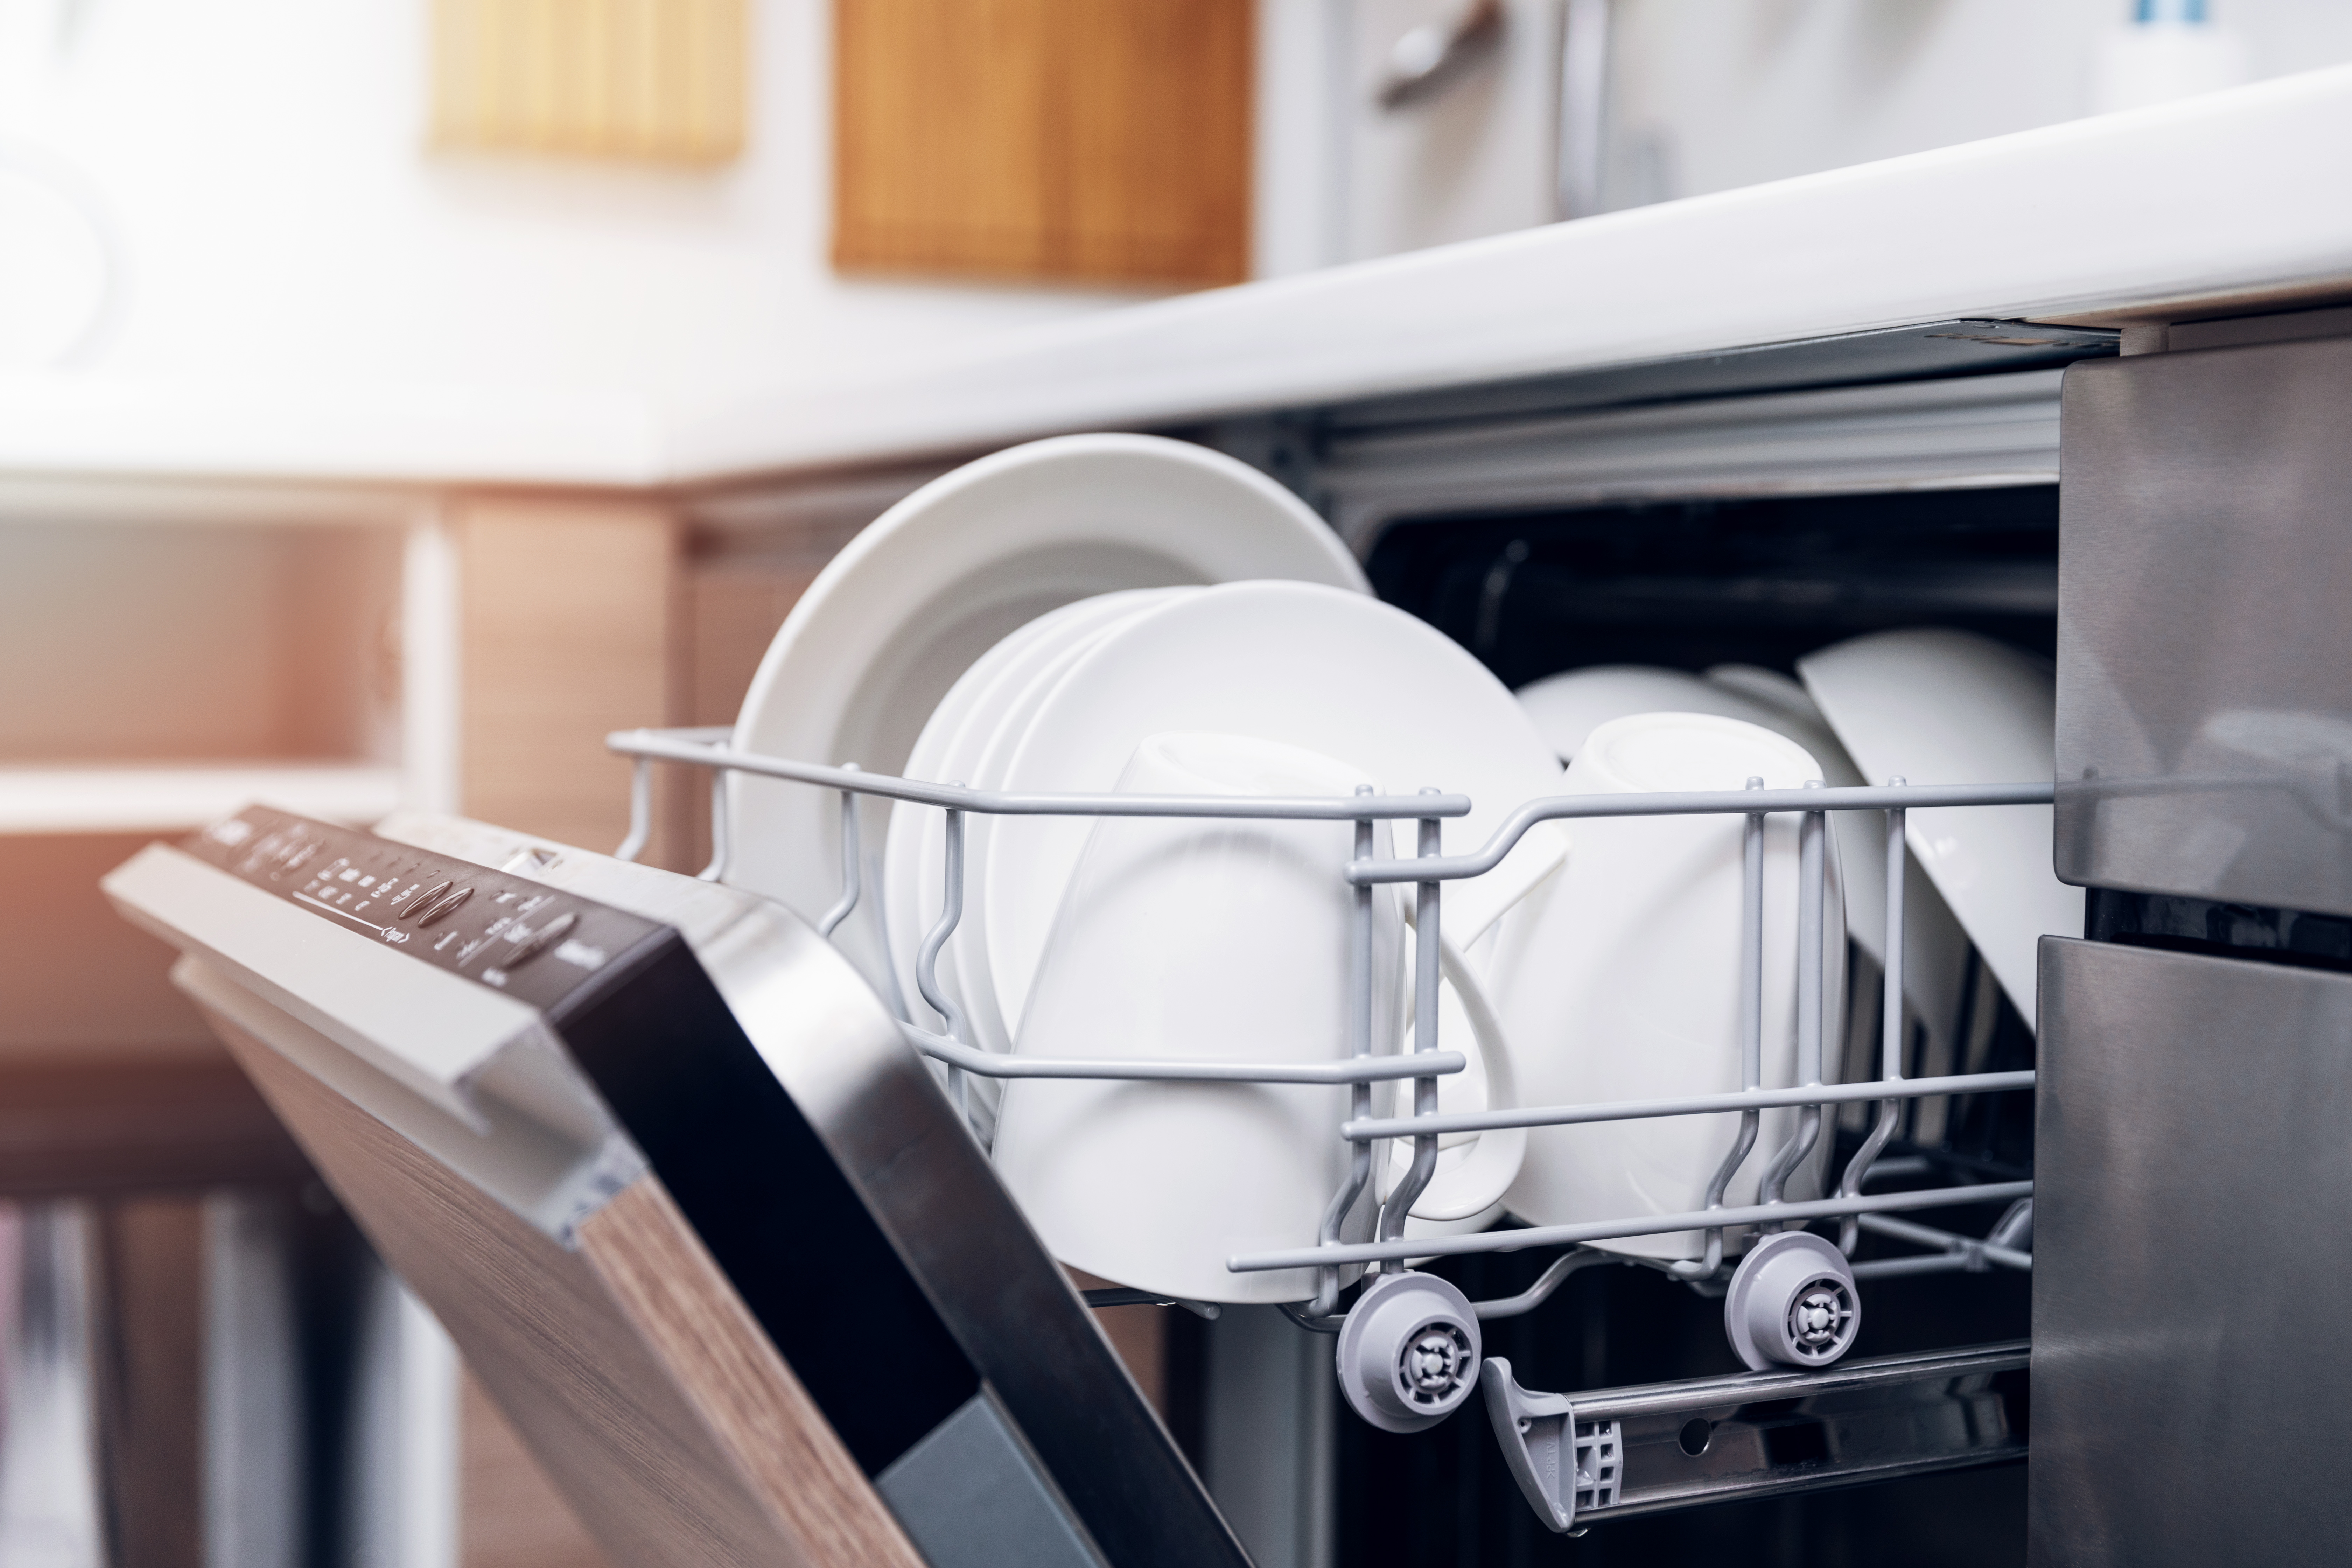 Most of us have ditched the dishwasher - but does it actually help with the costs?